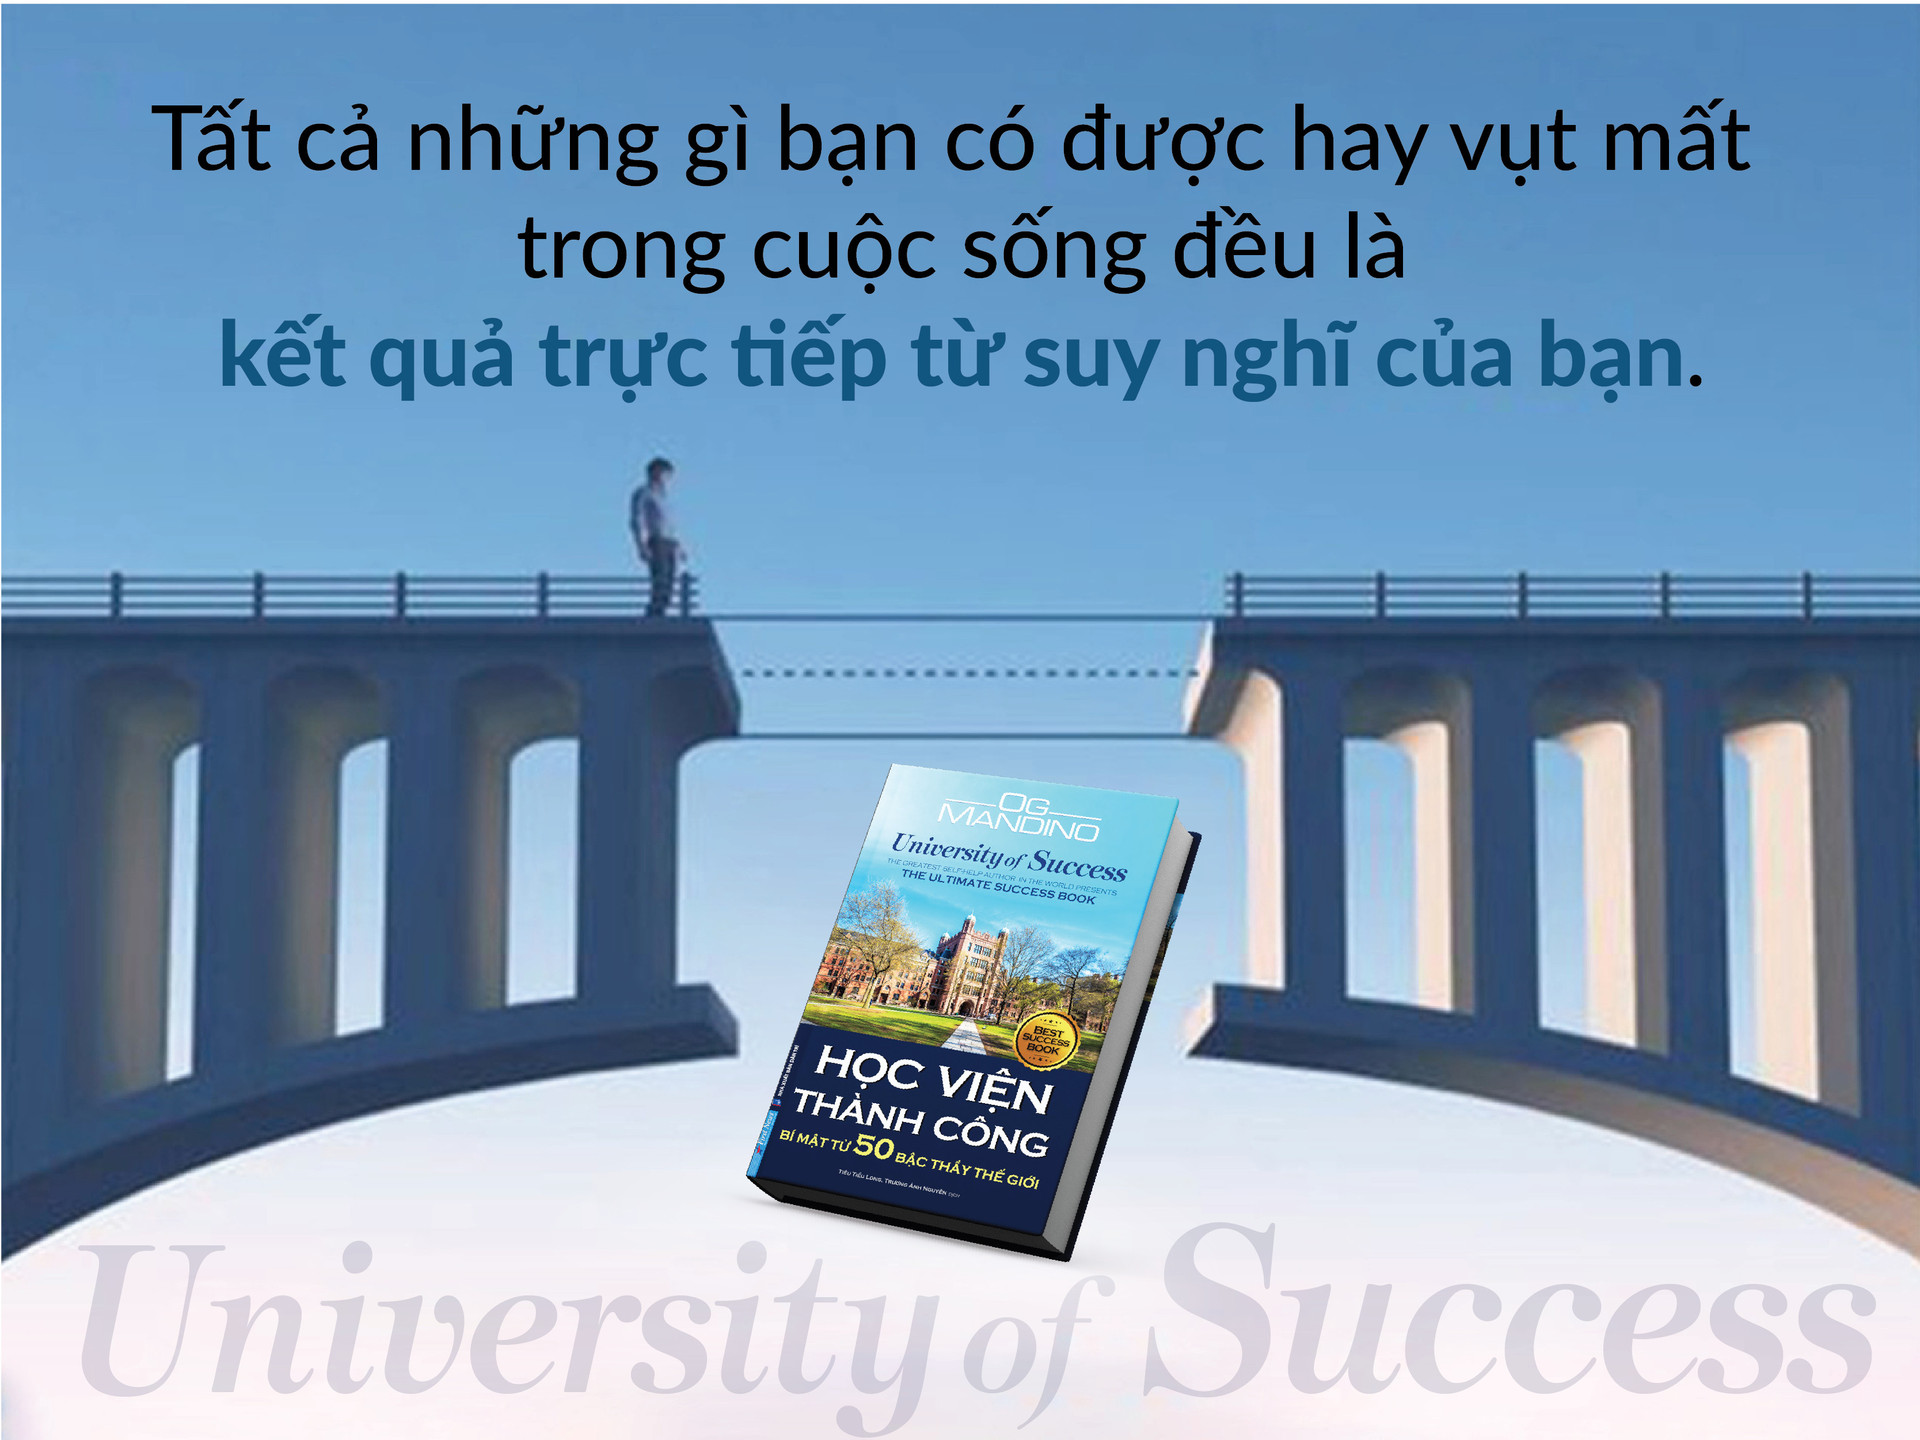 hoc-vien-thanh-cong-quote-2.jpg